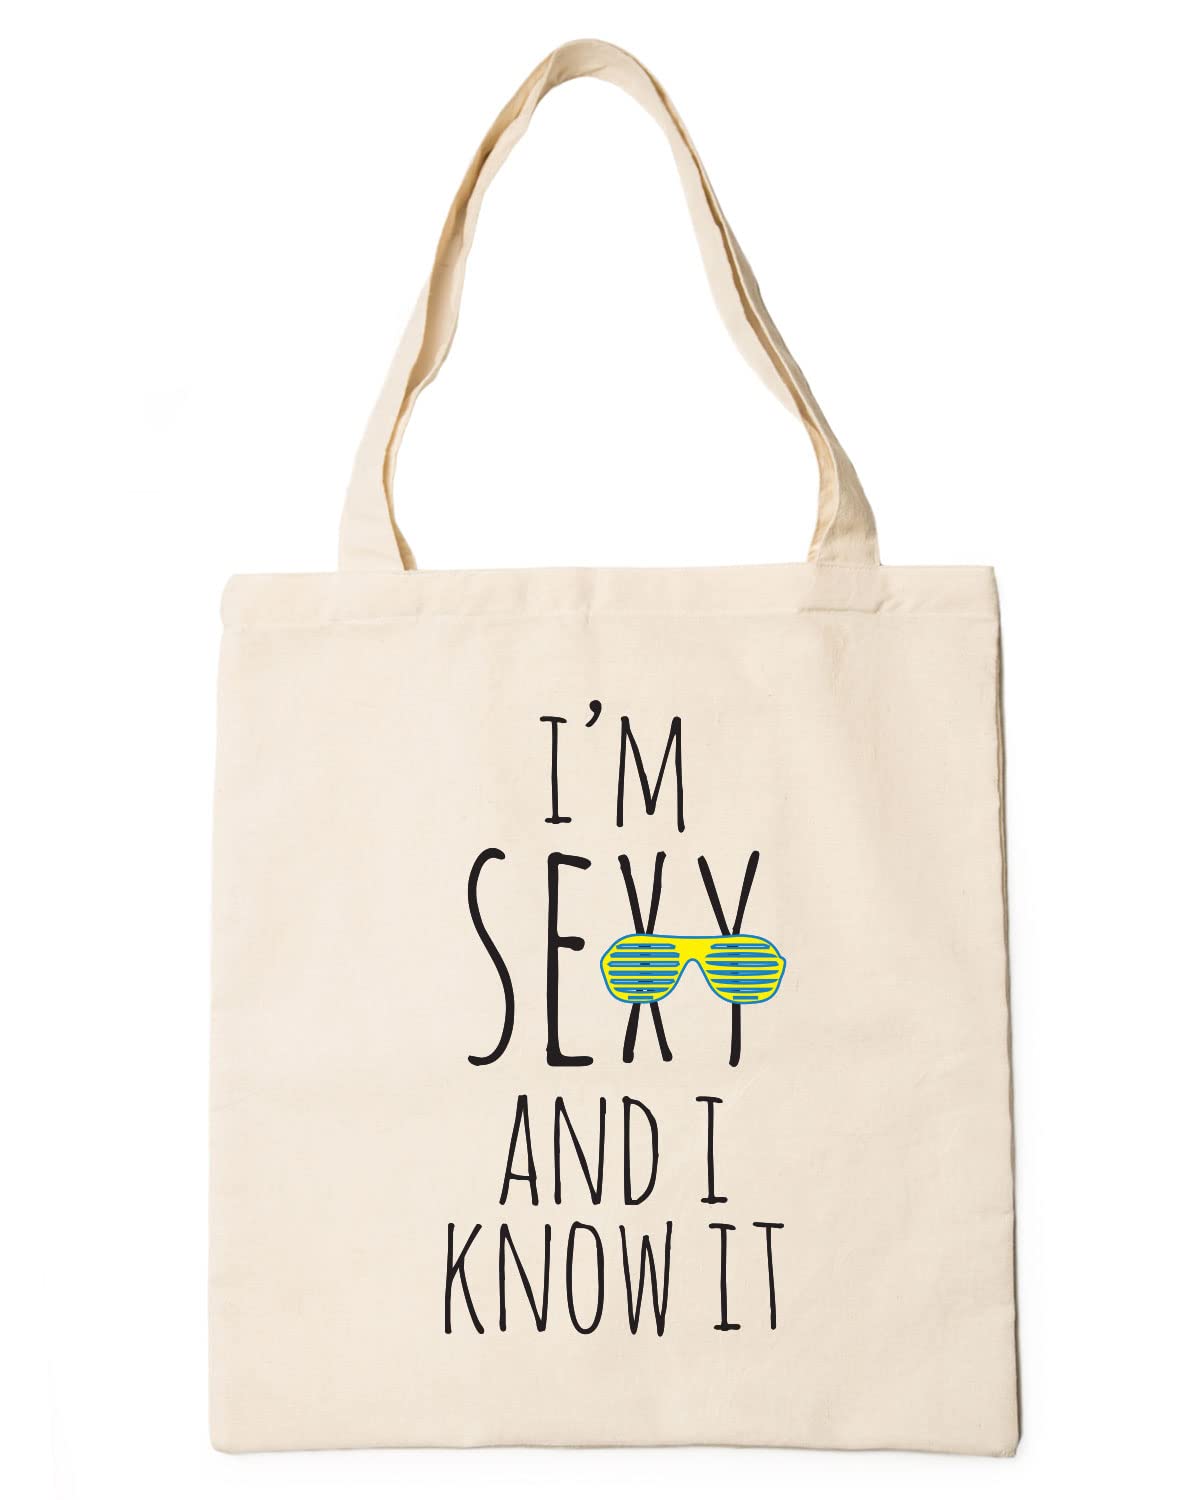 The Pink Magnet I'm Sexy Tote Bag - Canvas Tote Bag for Women | Printed Multipurpose Cotton Bags | Cute Hand Bag for Girls | Best for College, Travel, Grocery | Reusable Shopping Bag | Eco-Friendly Tote Bag